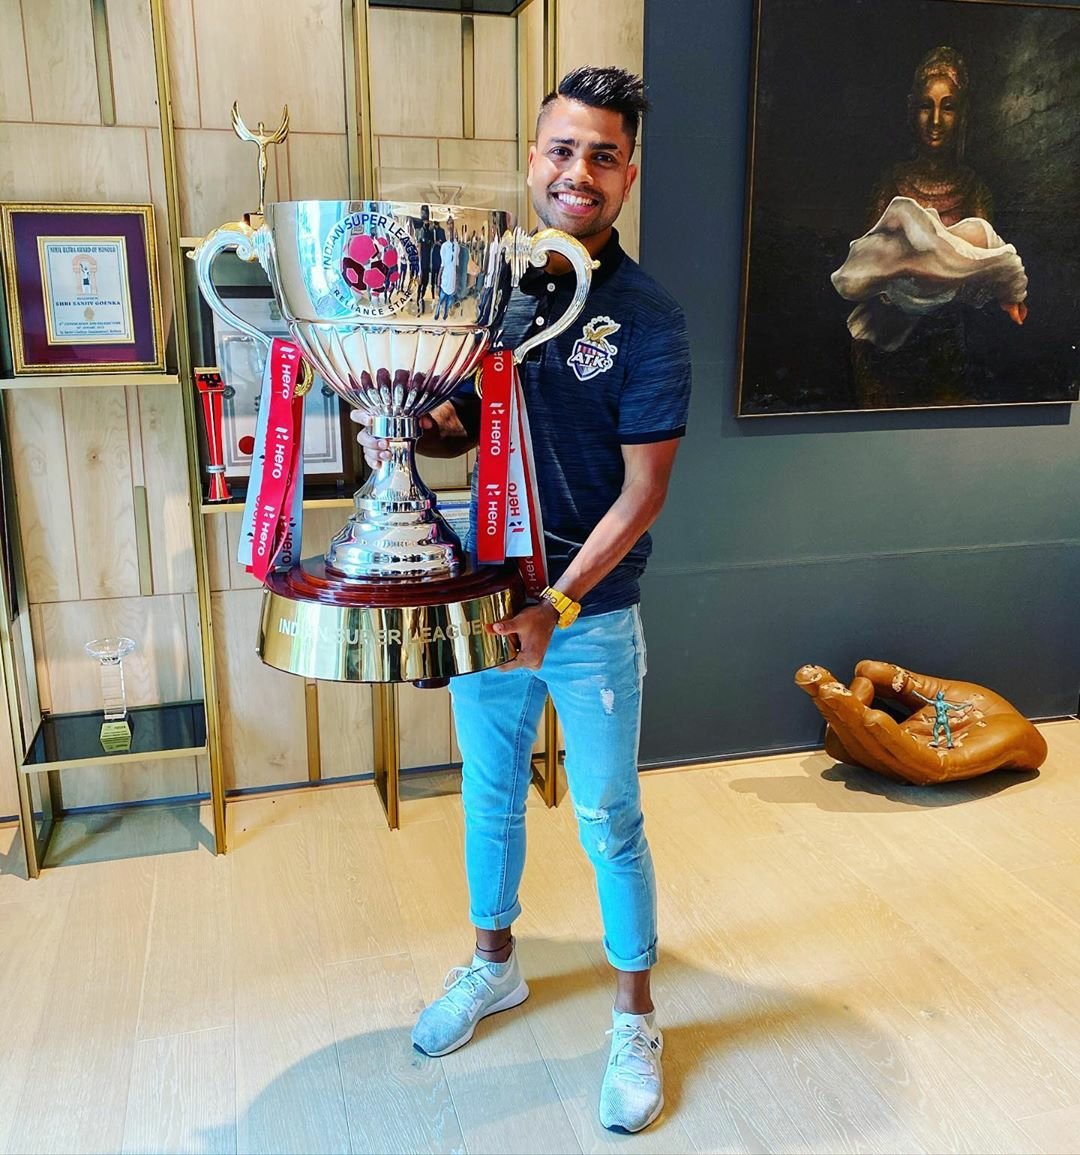 The reason I wake up every day and do what I do. Words can’t describe holding this trophy for a second time. I’m just so happy & so thankful. #AamarBukey #ATK #PD33 #Eksathe #BanglaBrigade #ISL #ISLChampion